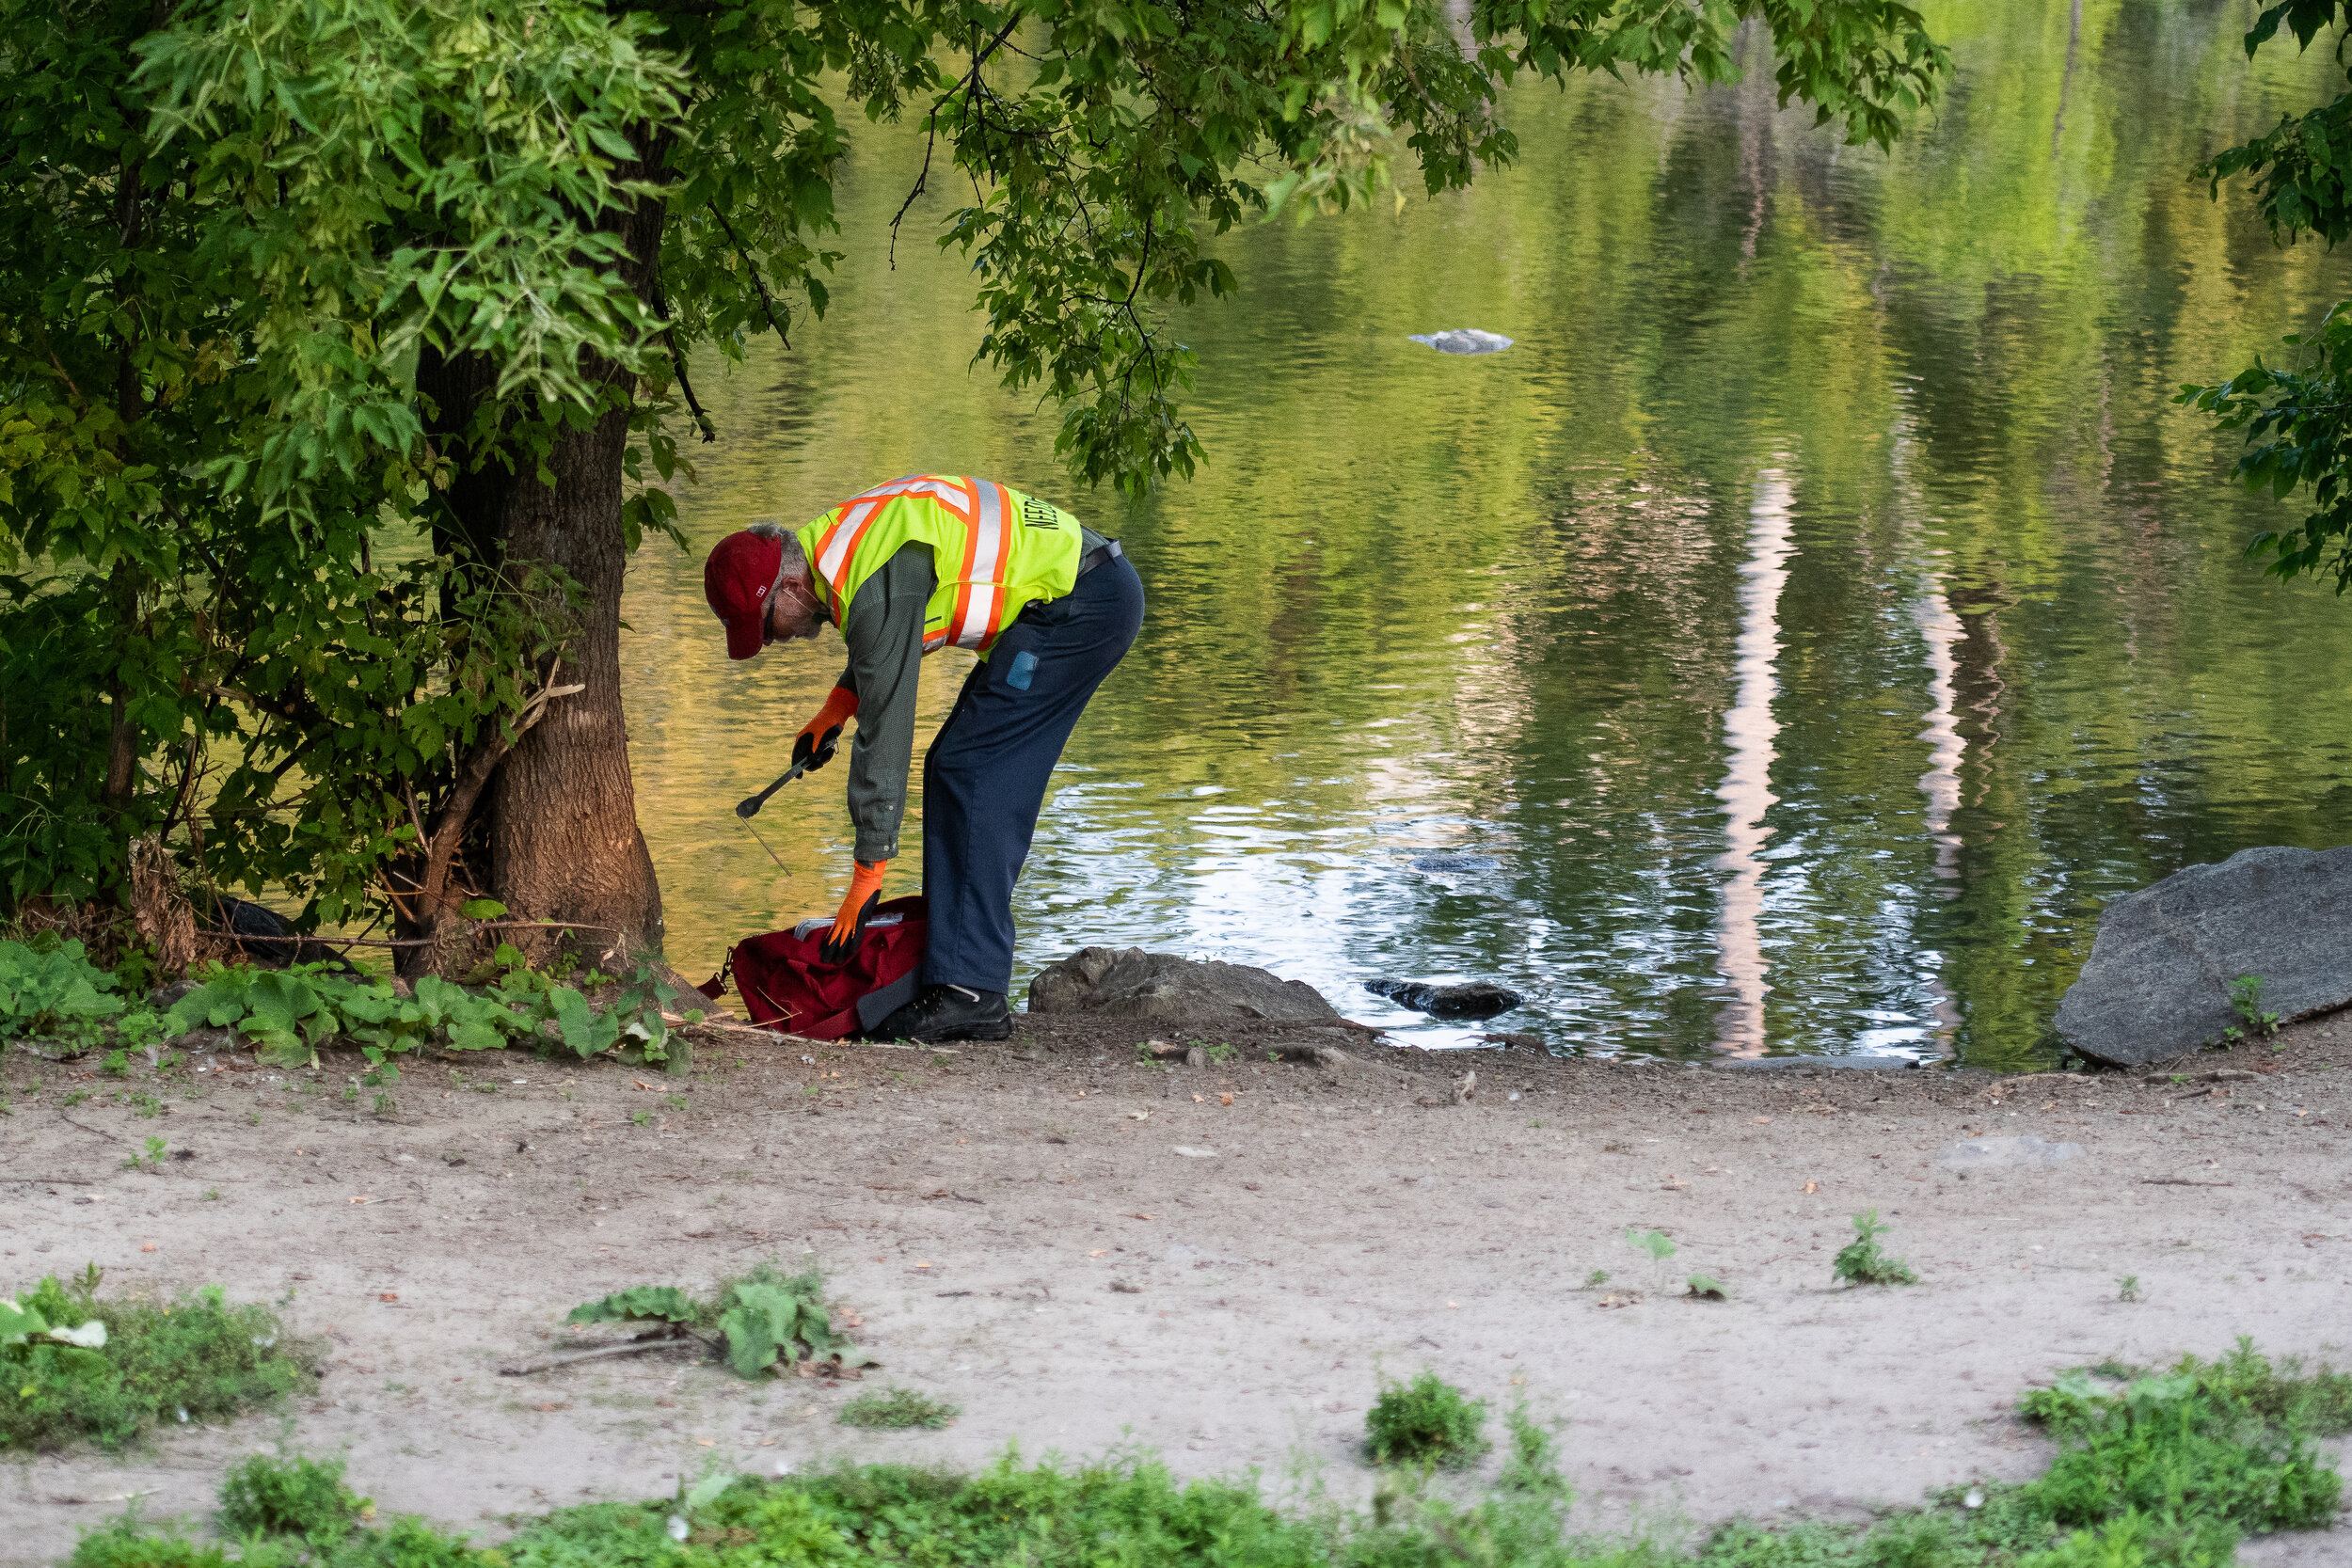  Needle hunter Phillip Truesdale's Vanier route takes him past several spots along the Rideau River. (Spencer Colby / CBC) 